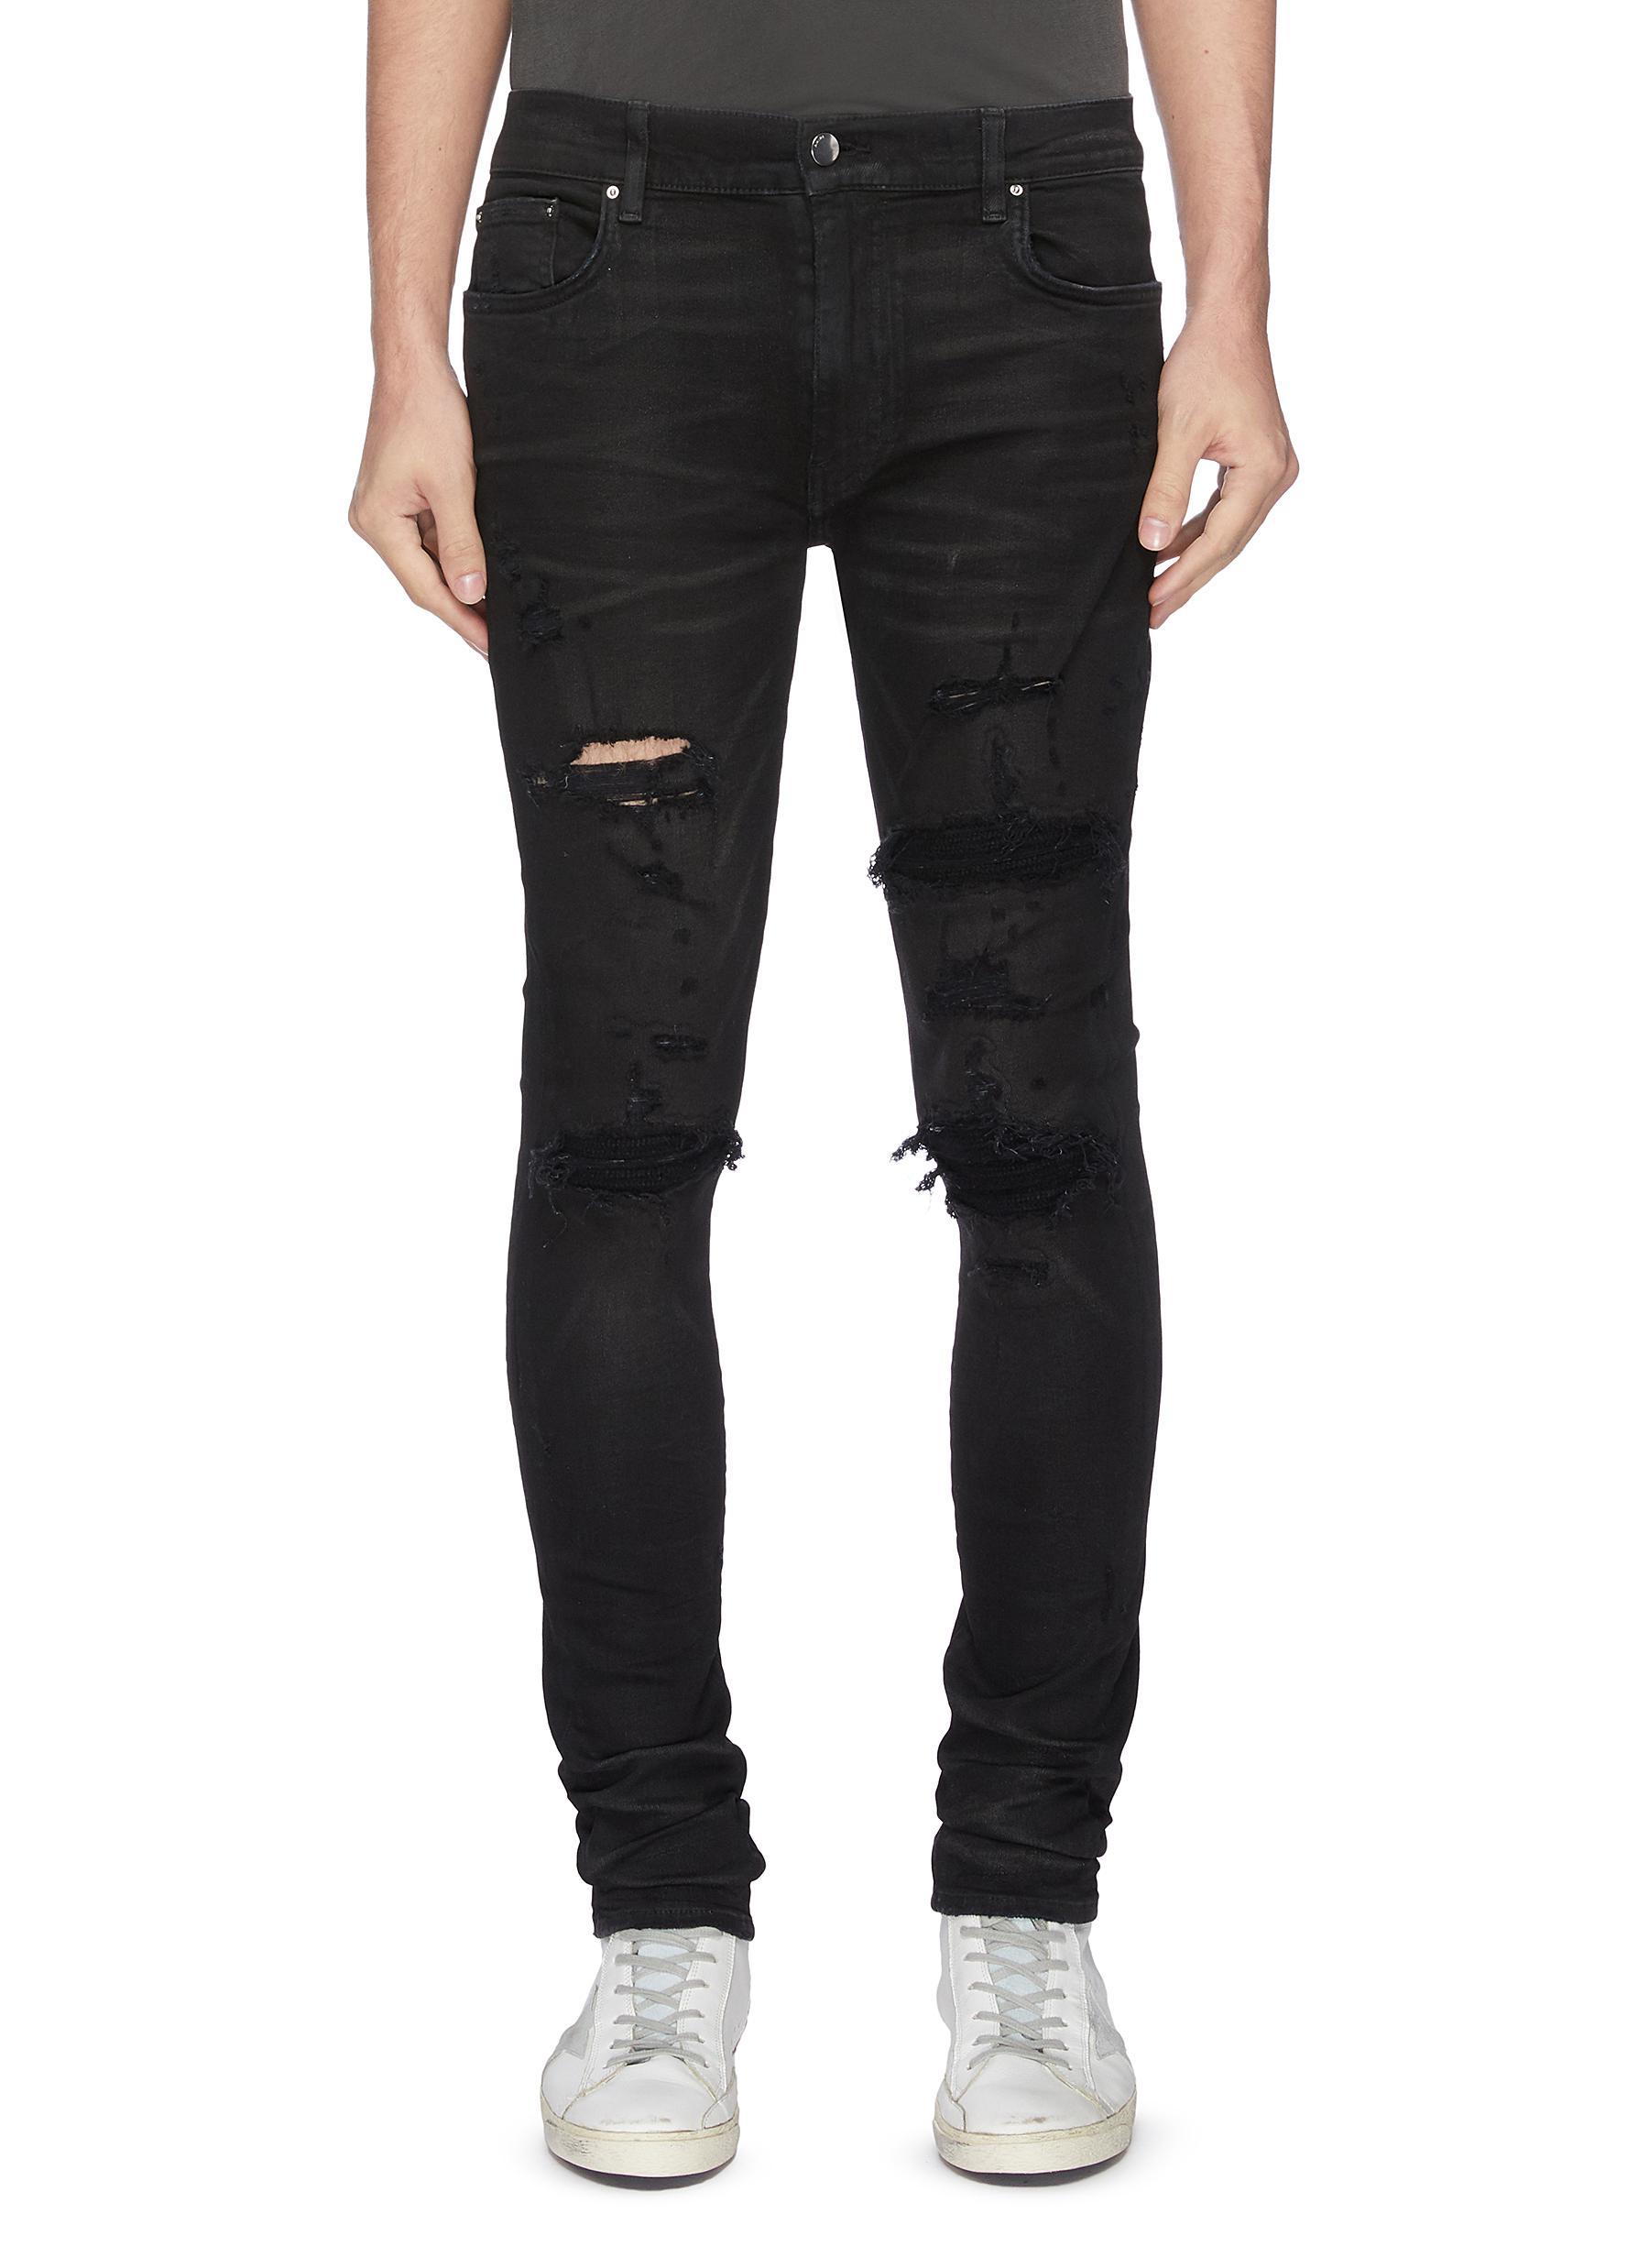 Amiri Distressed Cashmere Patch Jeans in Black for Men - Lyst